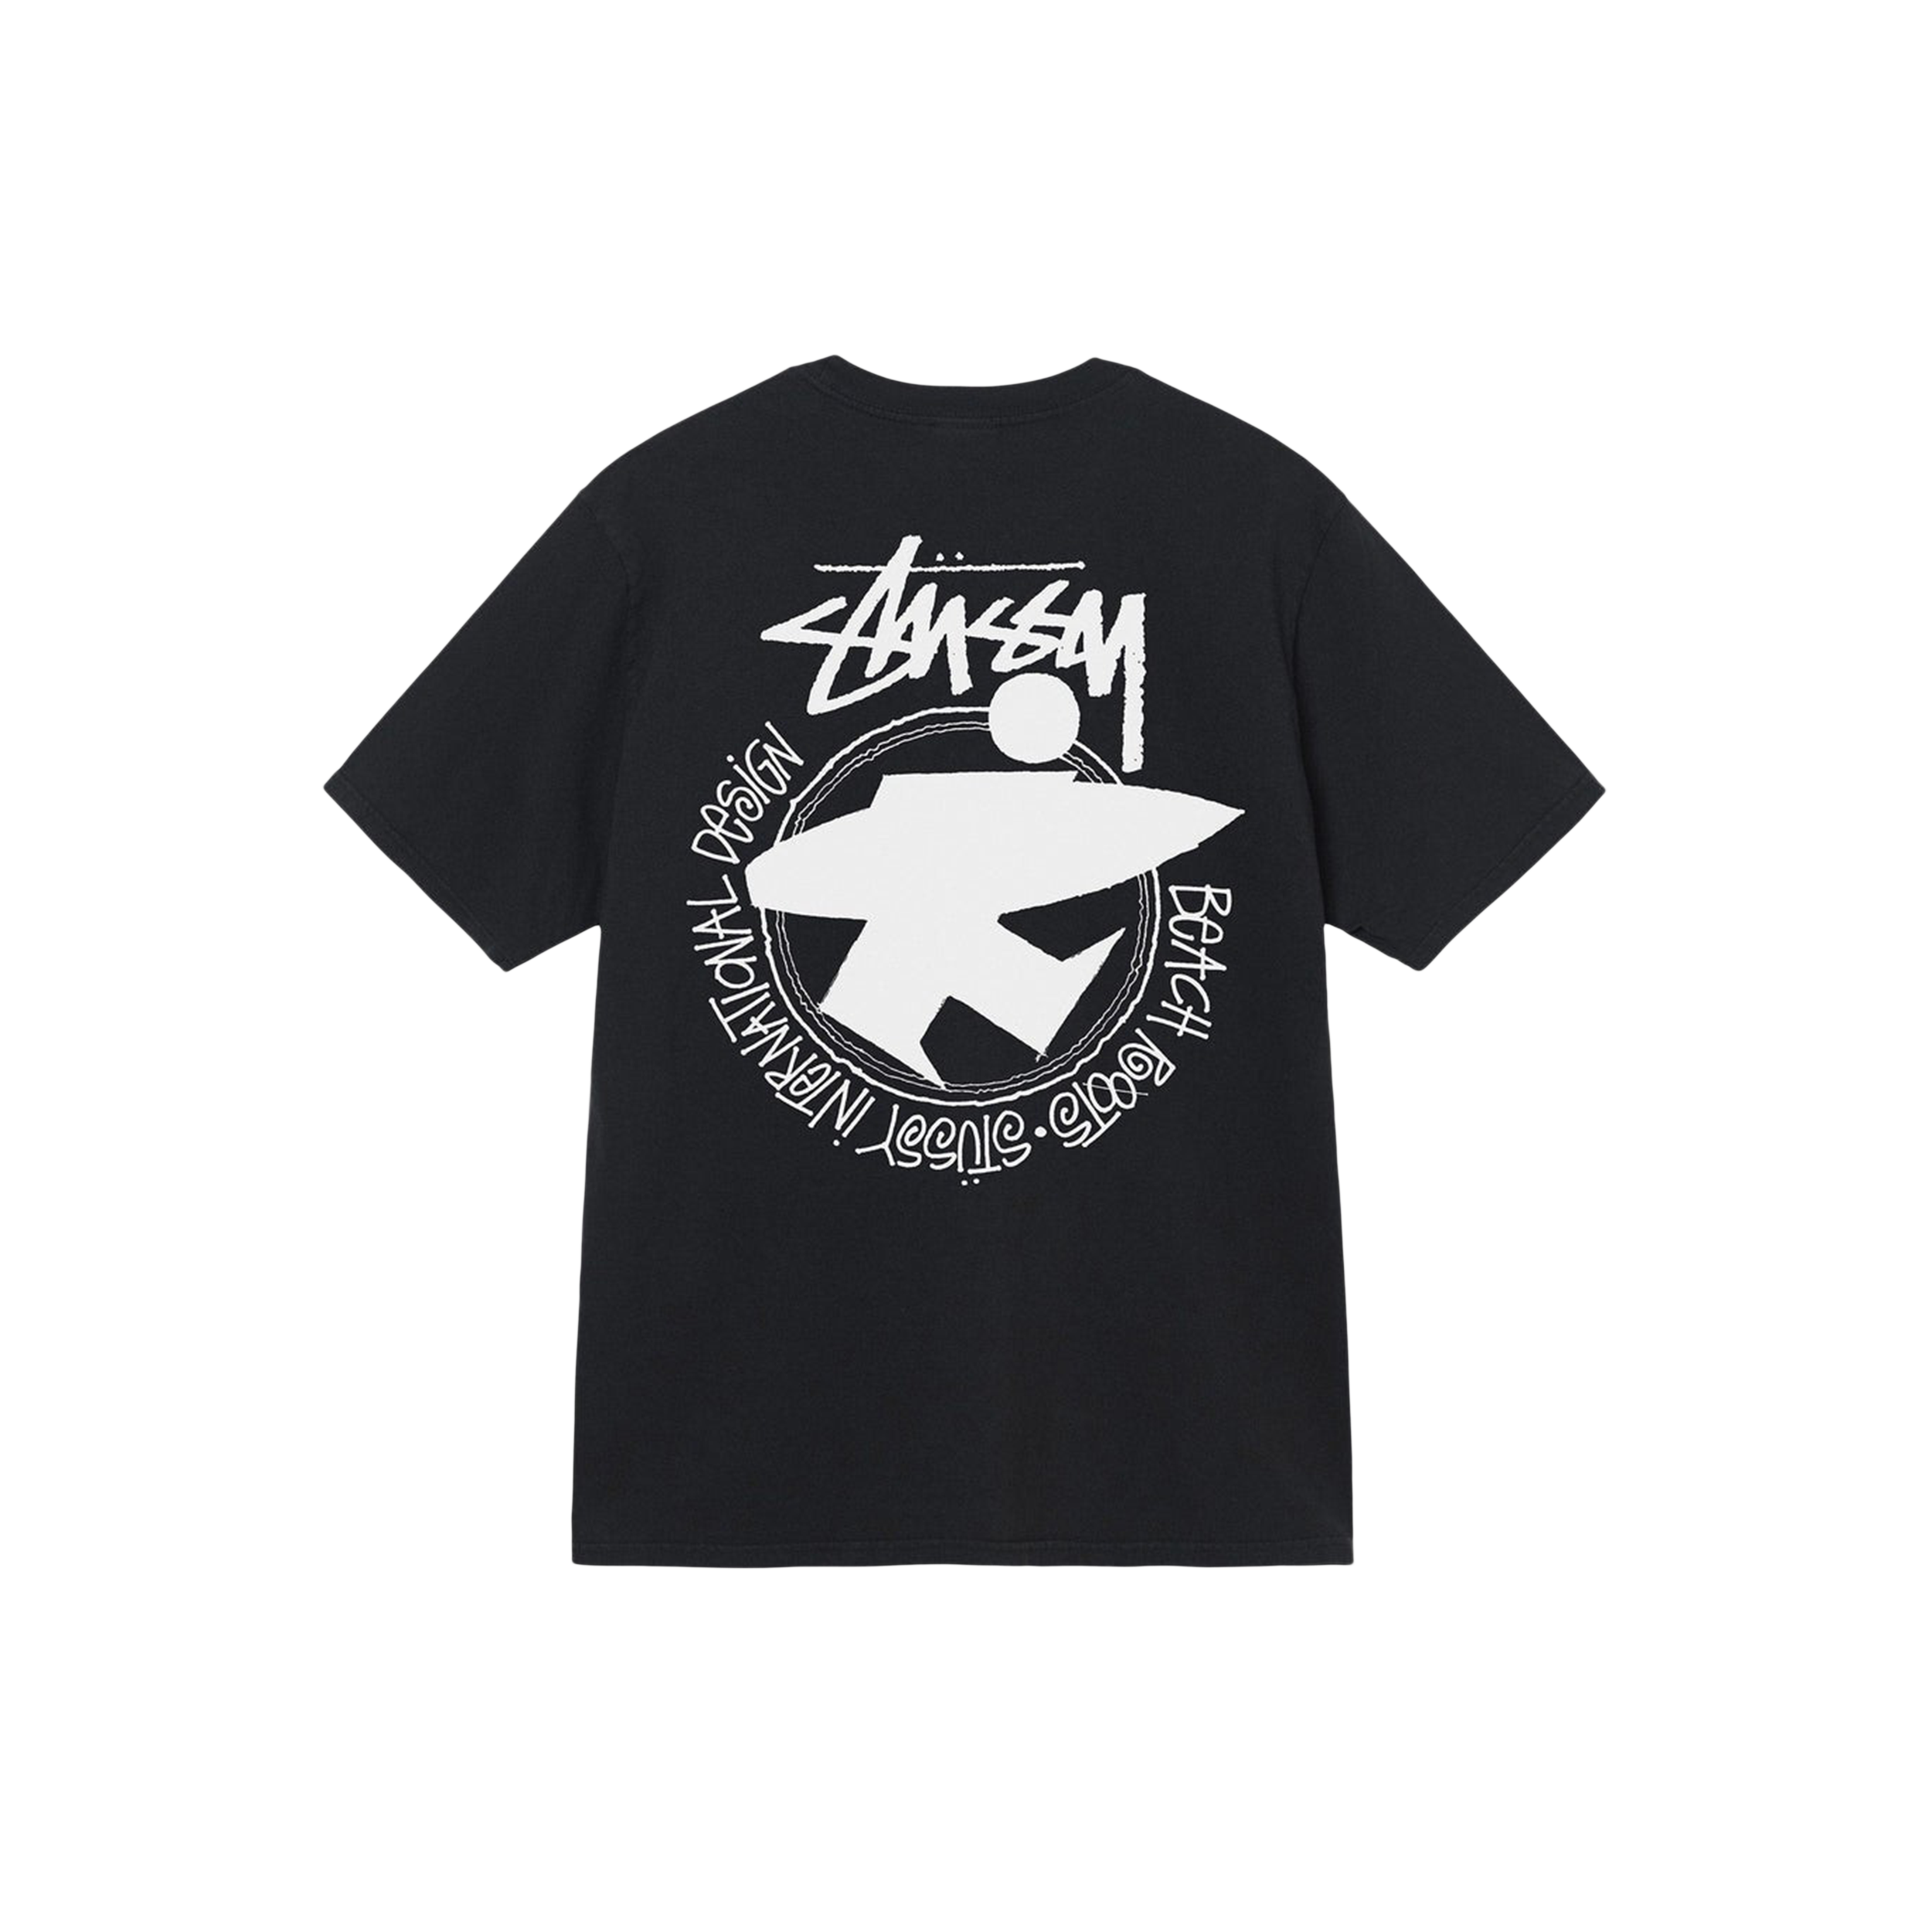 Stussy Archives - Siwilai